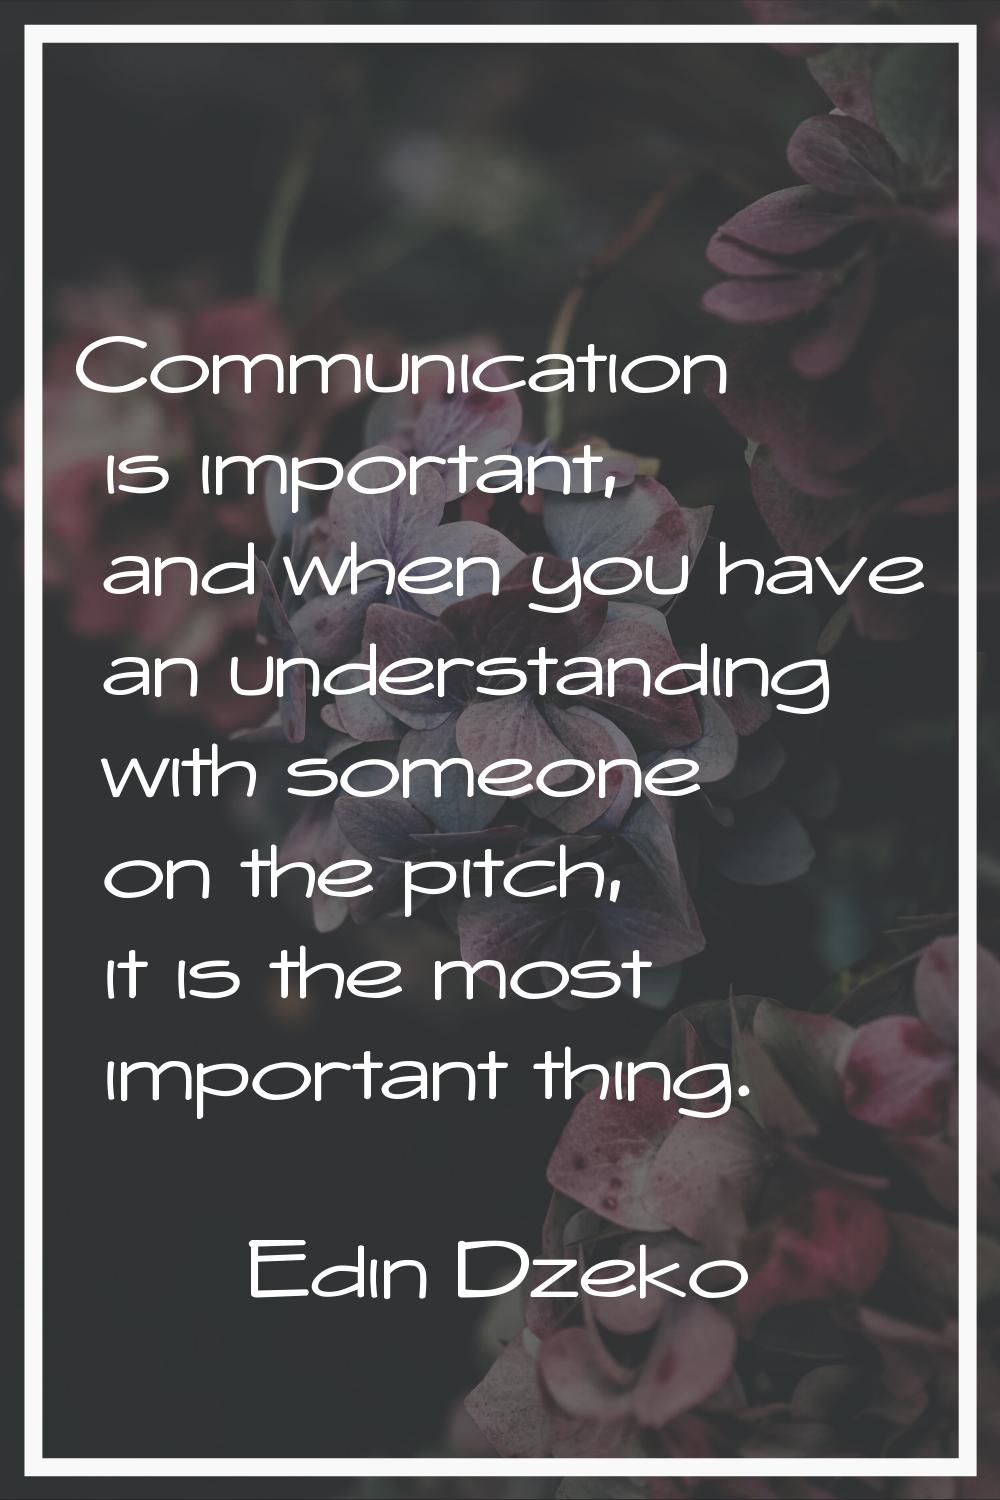 Communication is important, and when you have an understanding with someone on the pitch, it is the